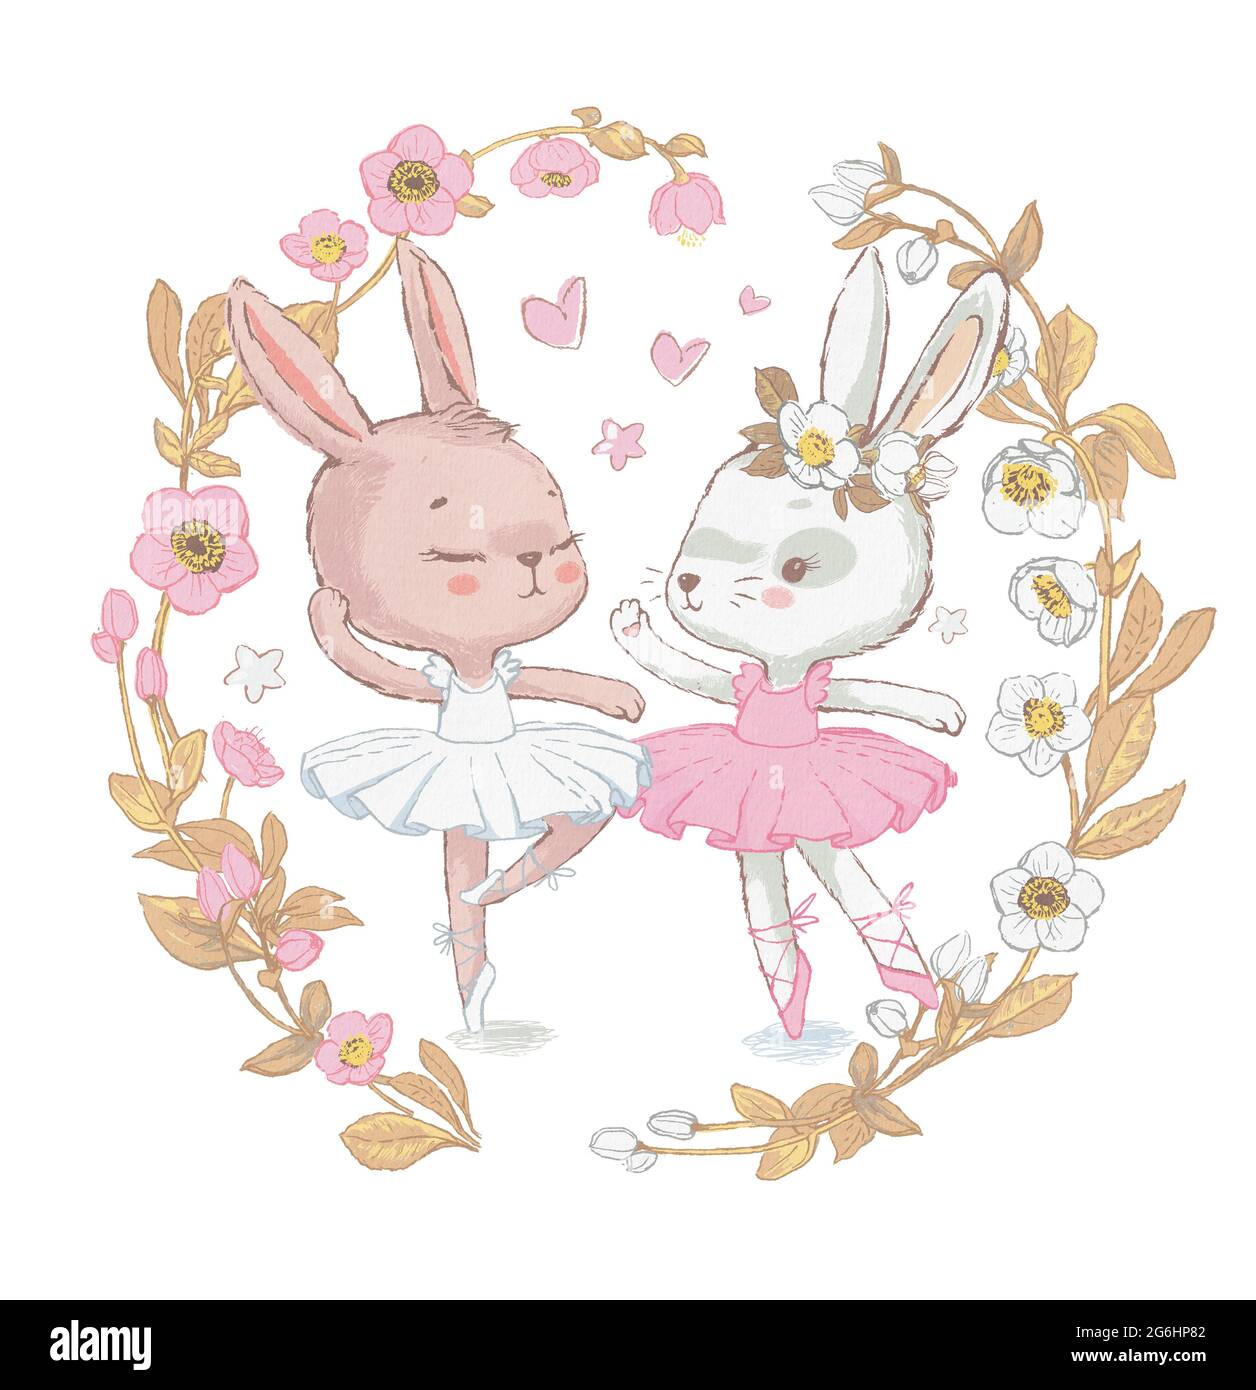 Two Adorable ballerina bunnies illustration surrounded by floral wreath. White dancing rabbits illustration. Can be used for t-shirt print, kids wear Stock Photo